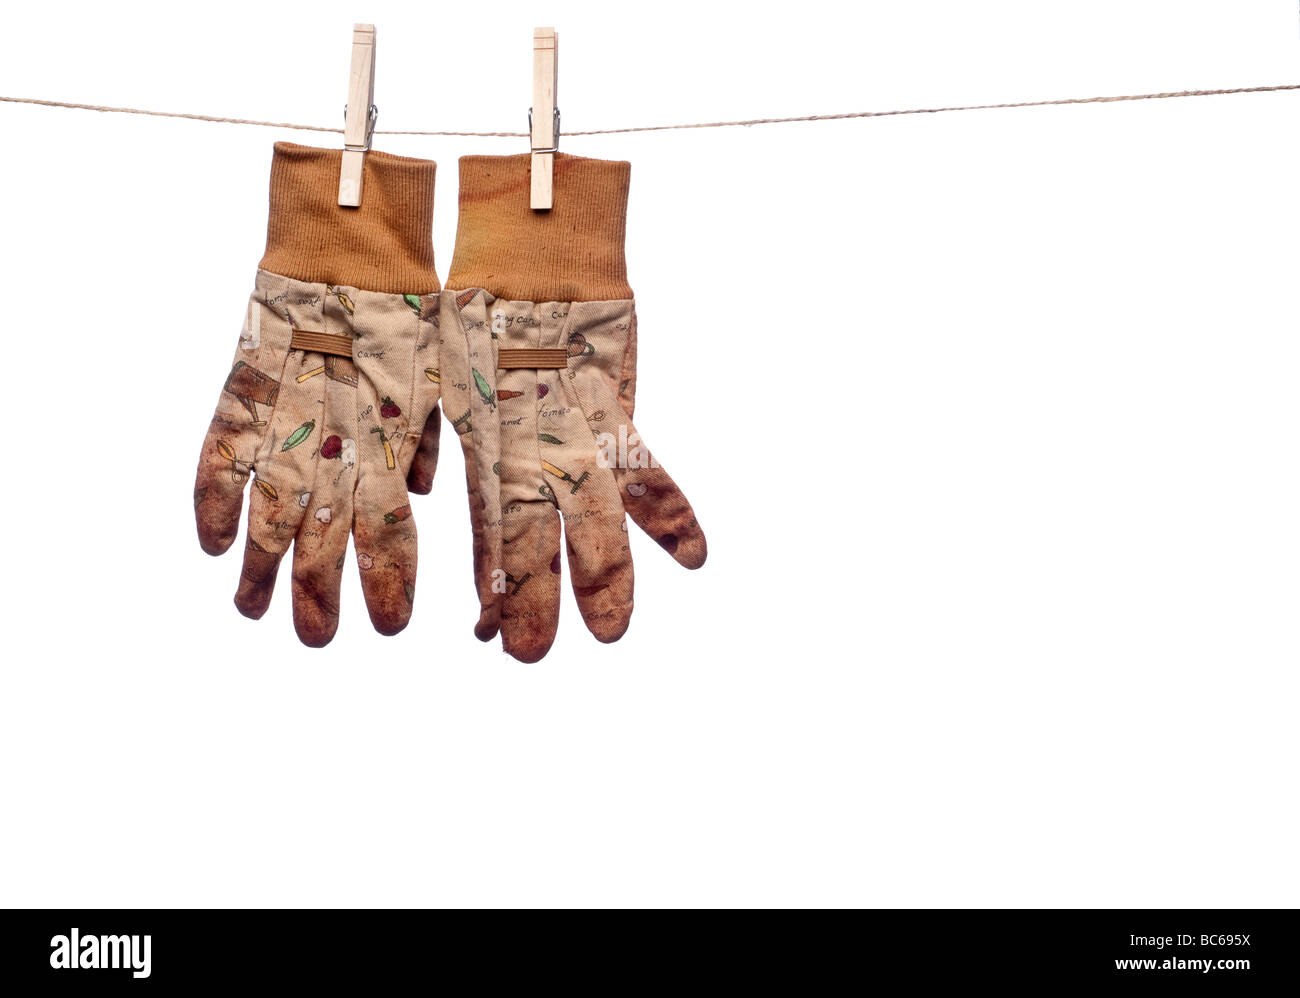 a horizontal image of dirty garden work gloves hanging on a clothes line Stock Photo